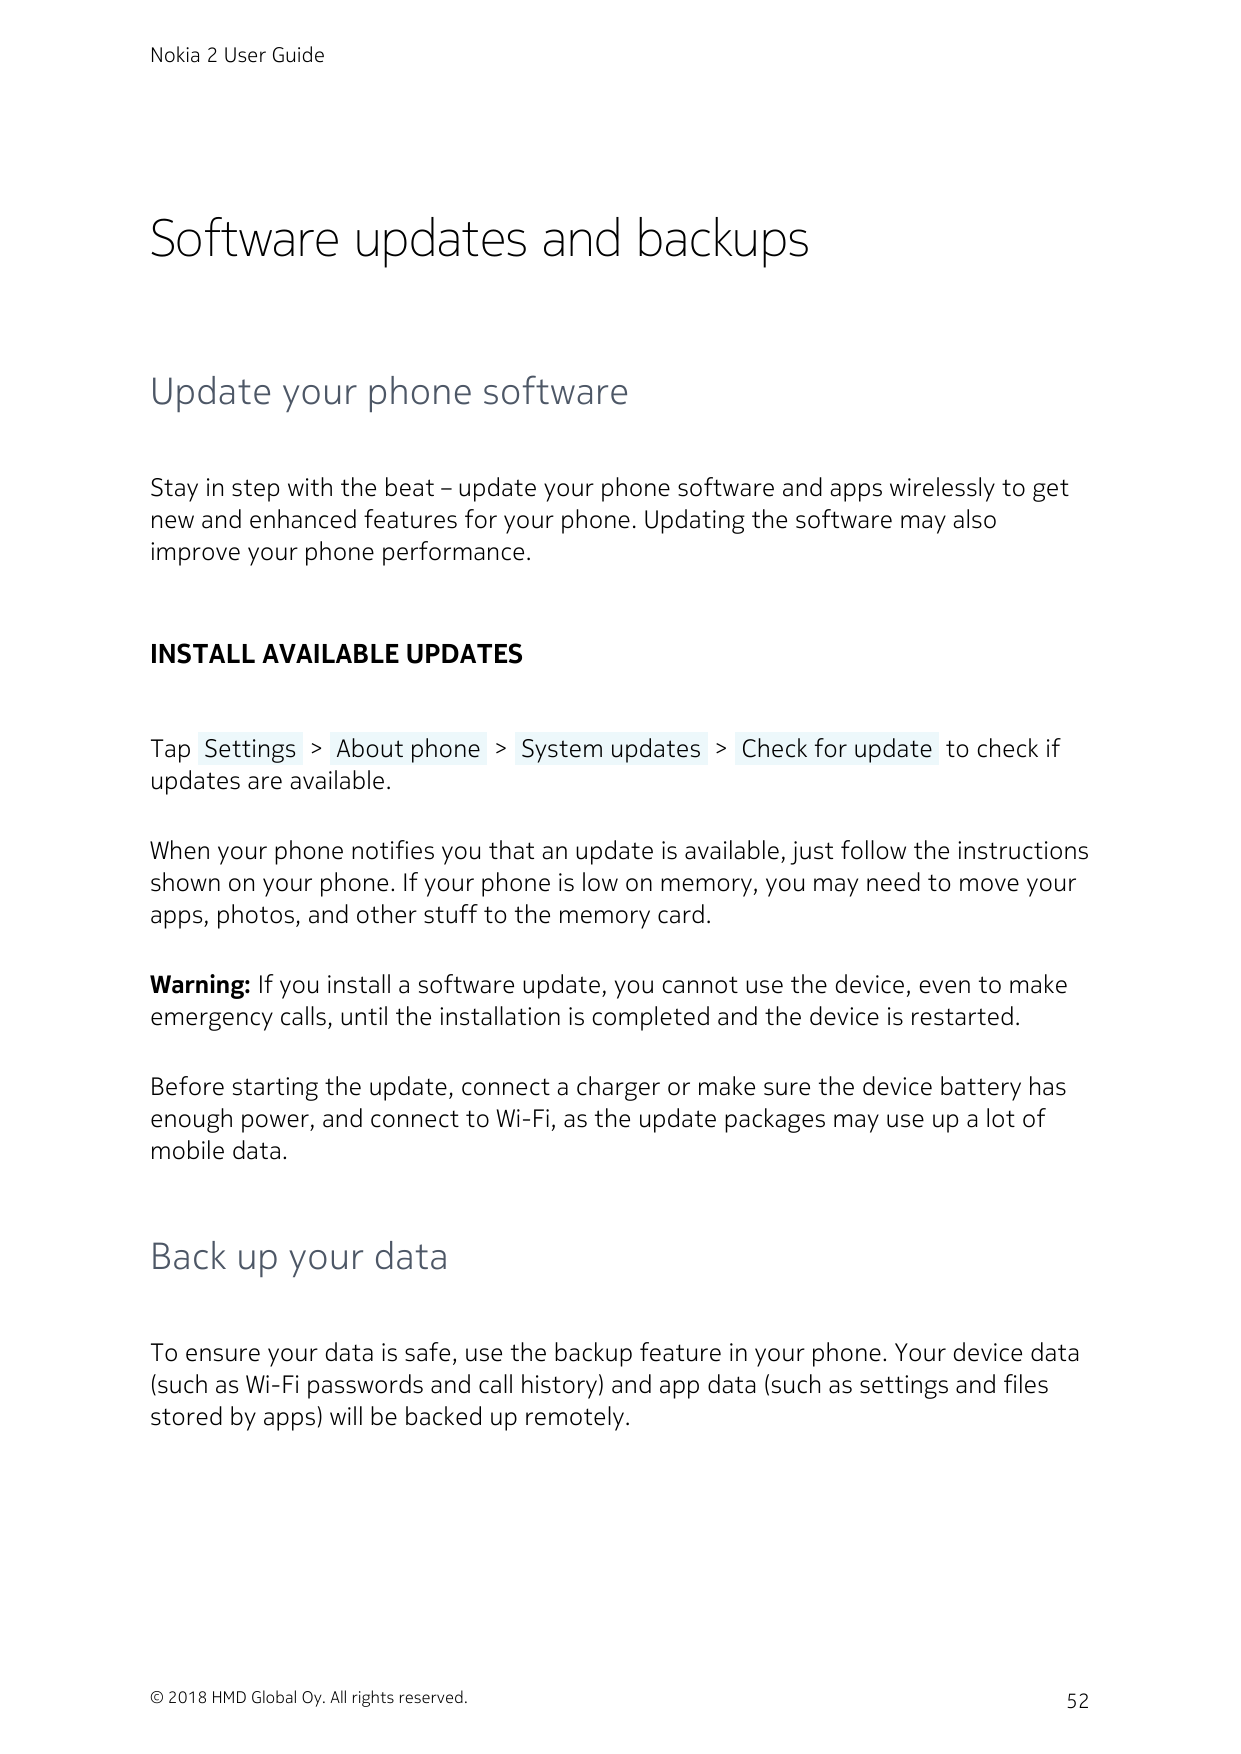 Nokia 2 User GuideSoftware updates and backupsUpdate your phone softwareStay in step with the beat – update your phone software 